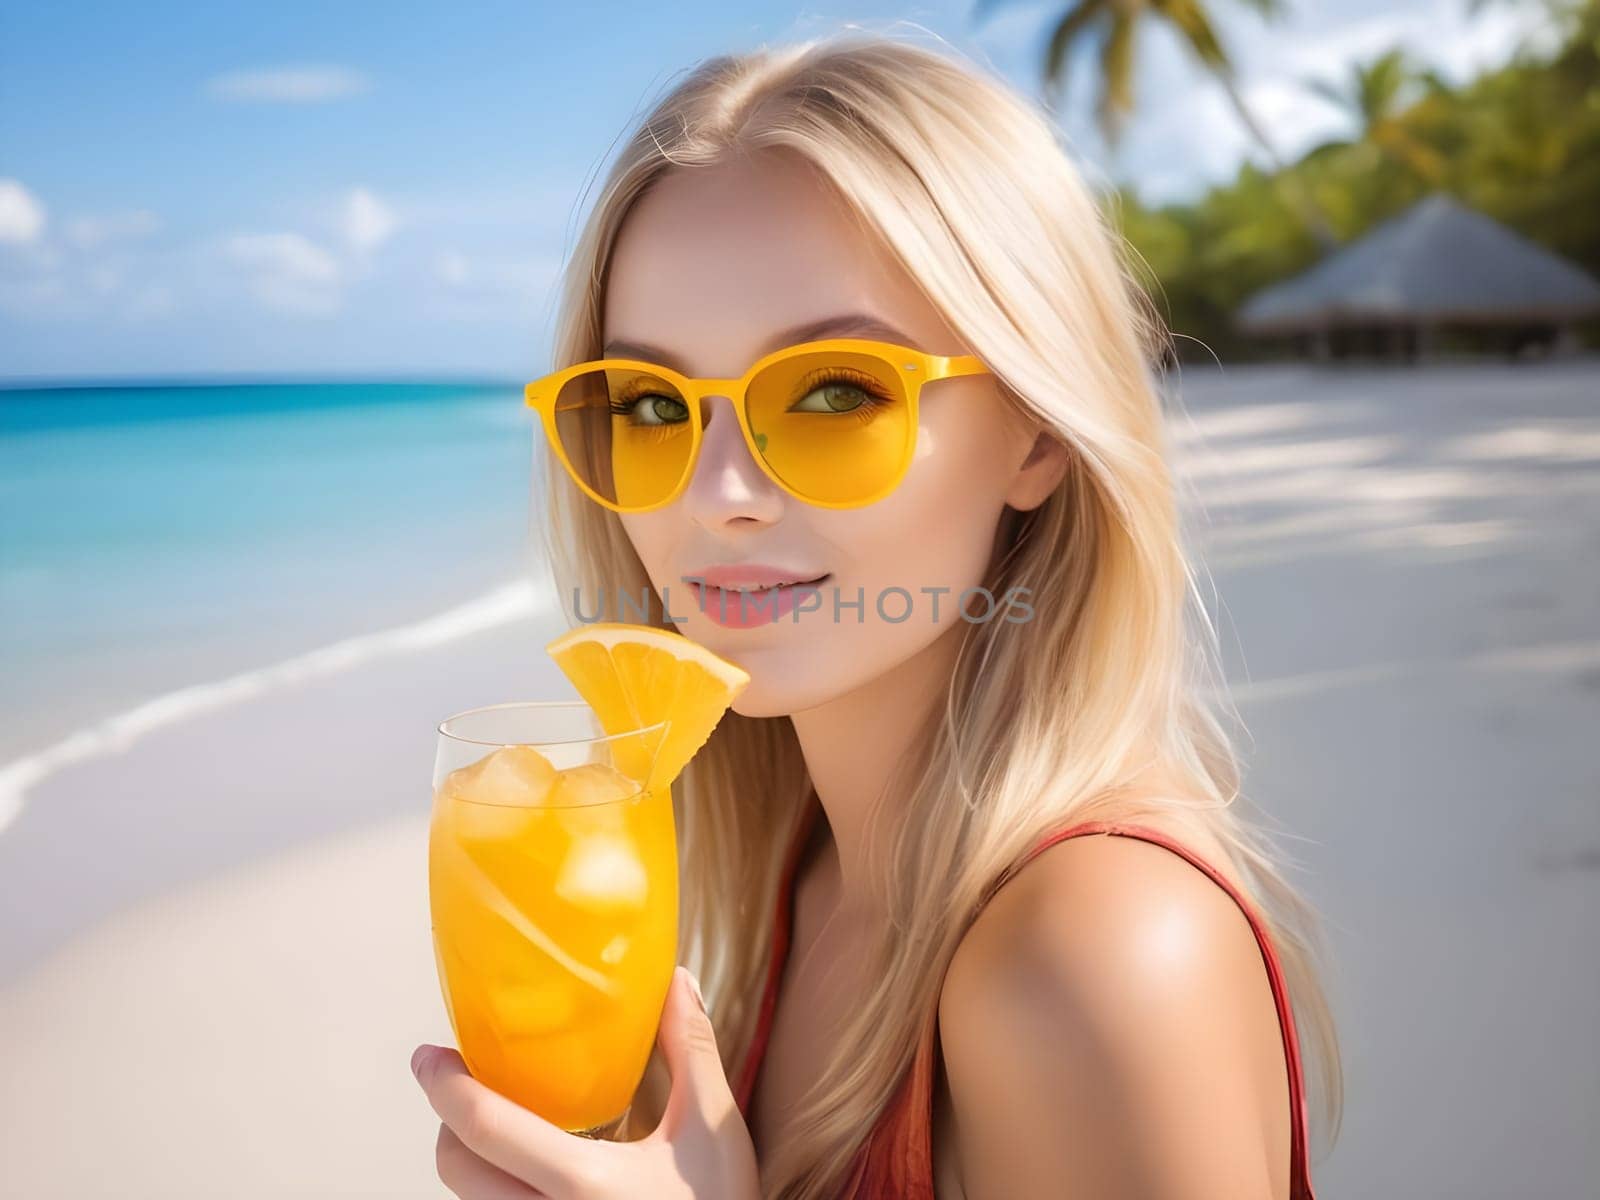 Happy woman with sunglasses and a glass of orange juice on tropic beach. by andre_dechapelle